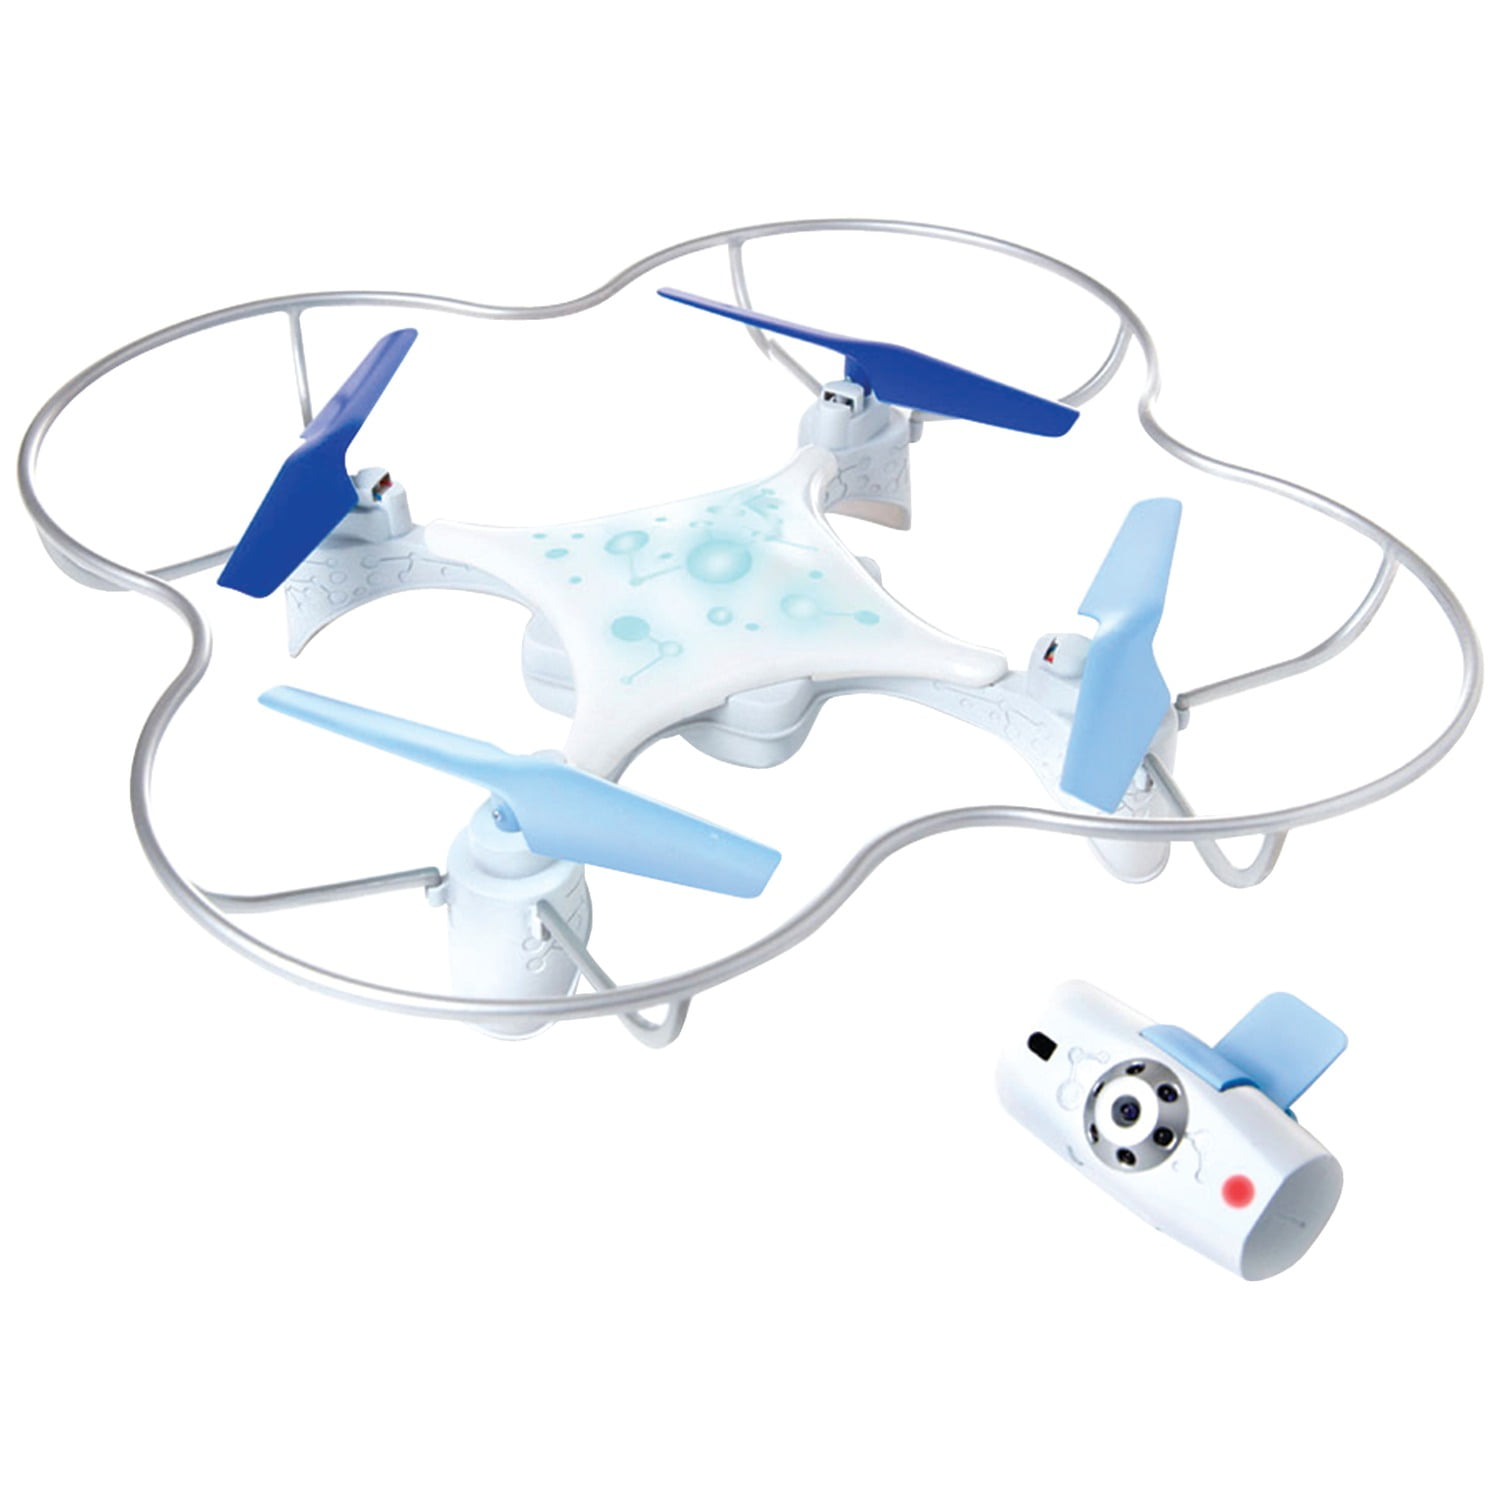 WowWee 4447 Lumi Gaming 8.25 Quadcopter Drone for sale online